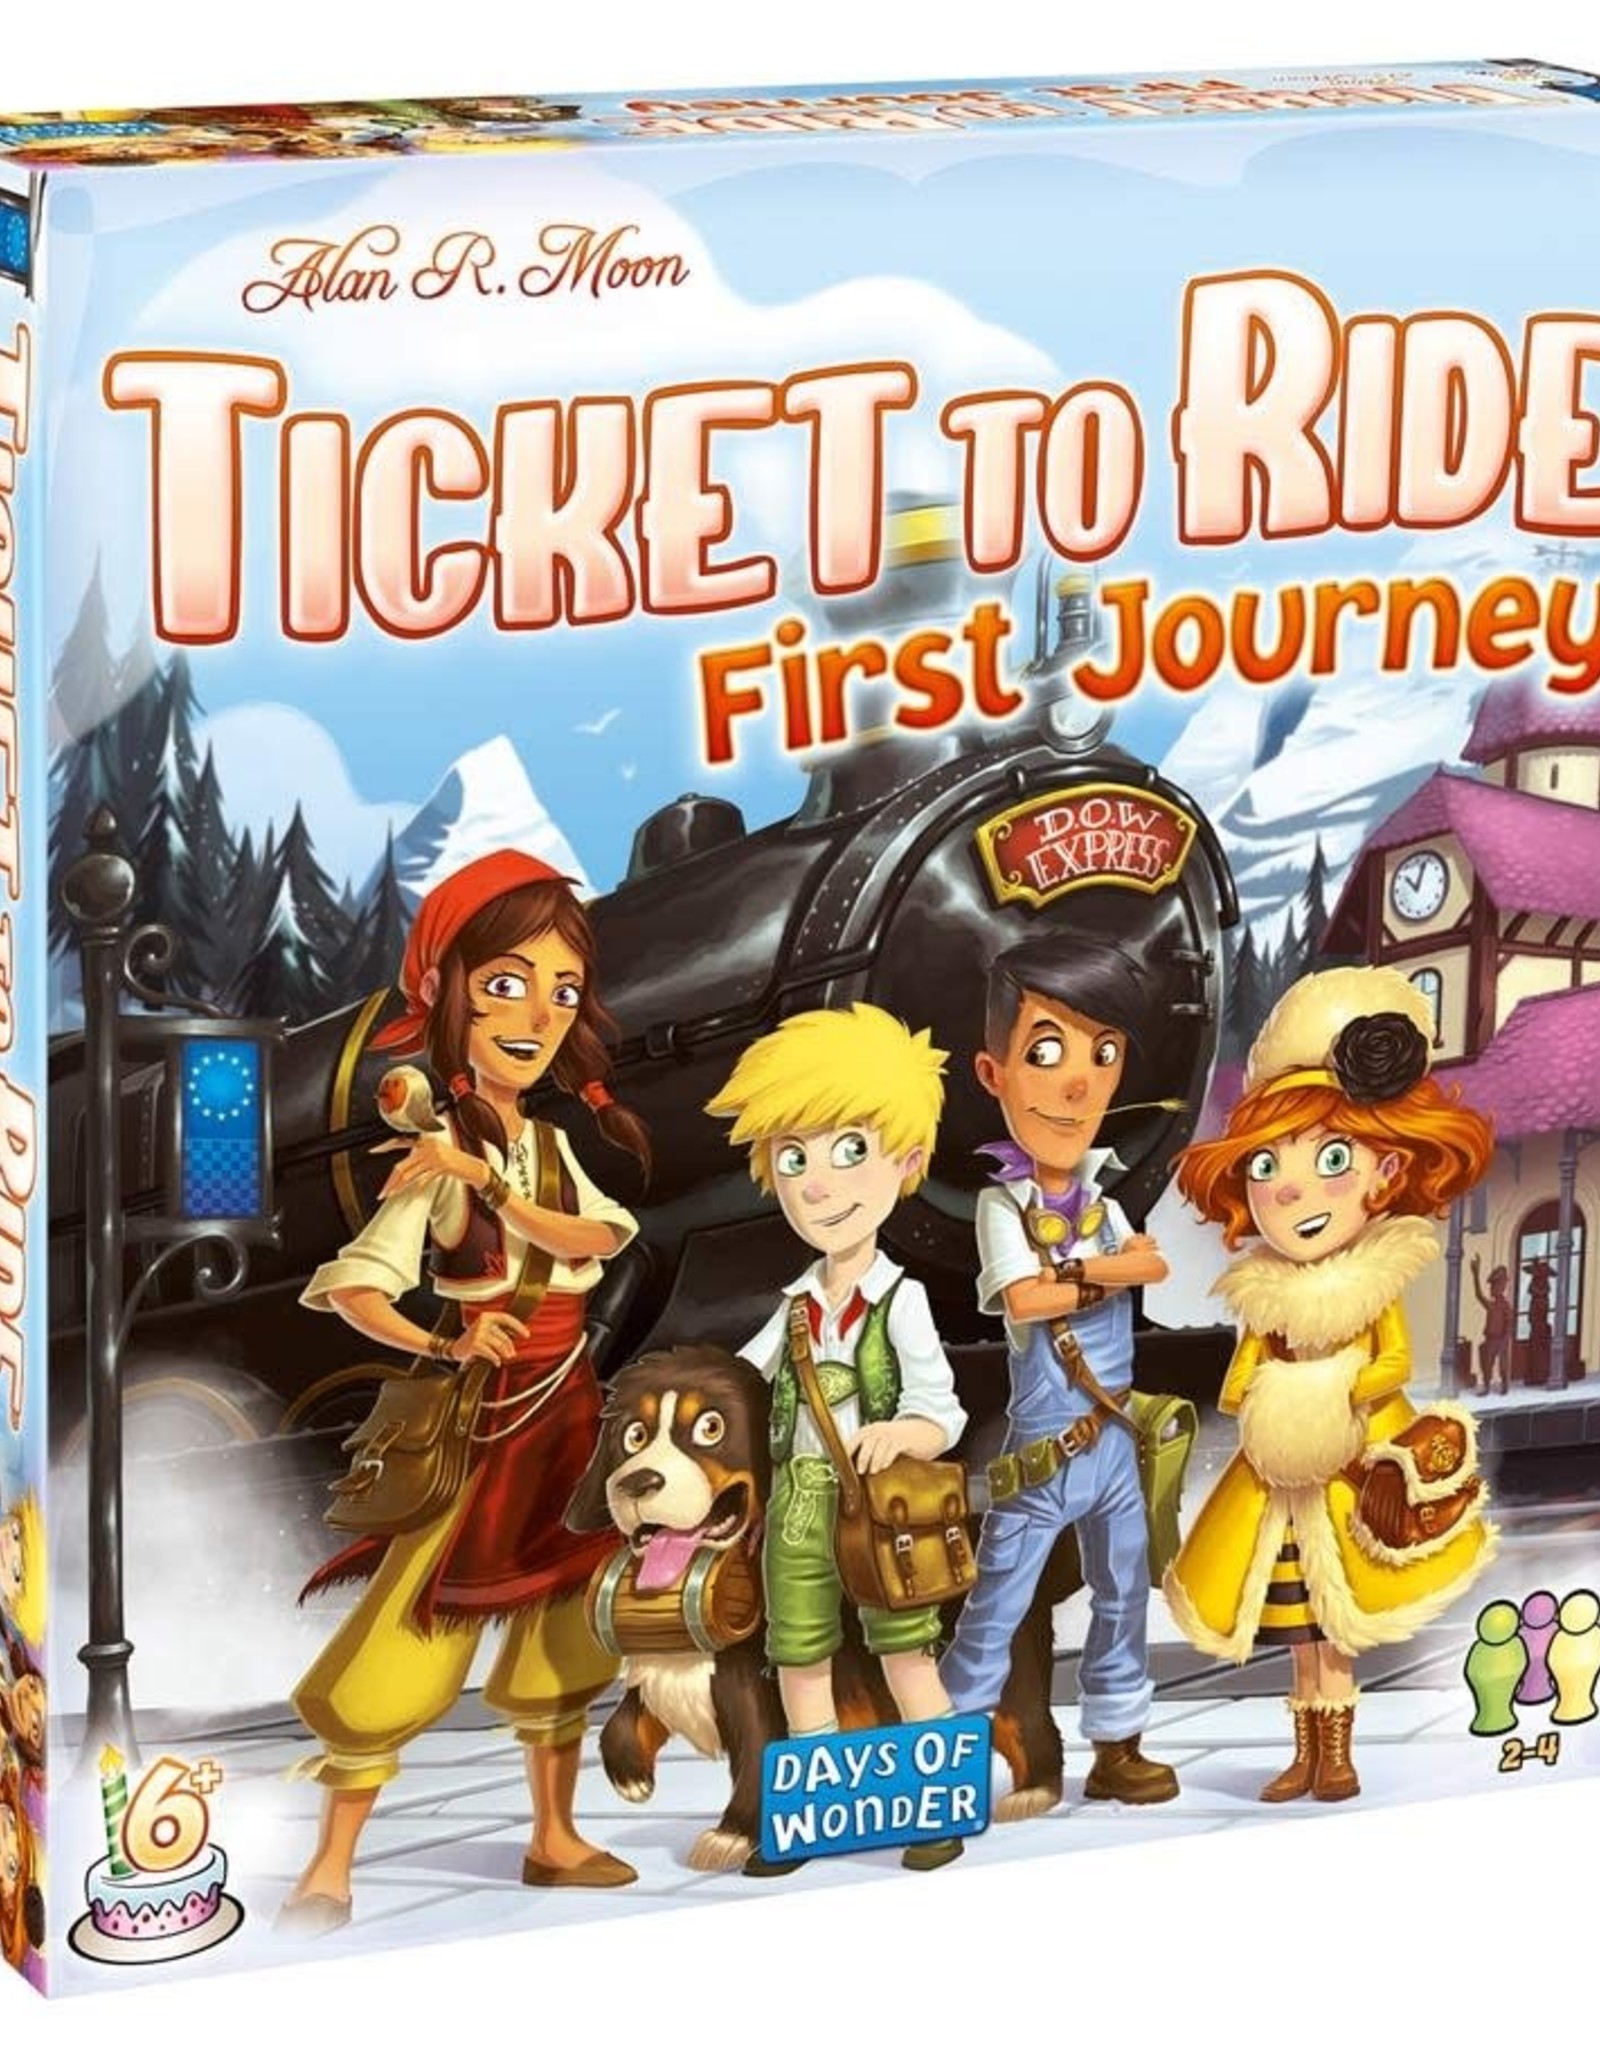 Ticket to Ride First Journey Europe